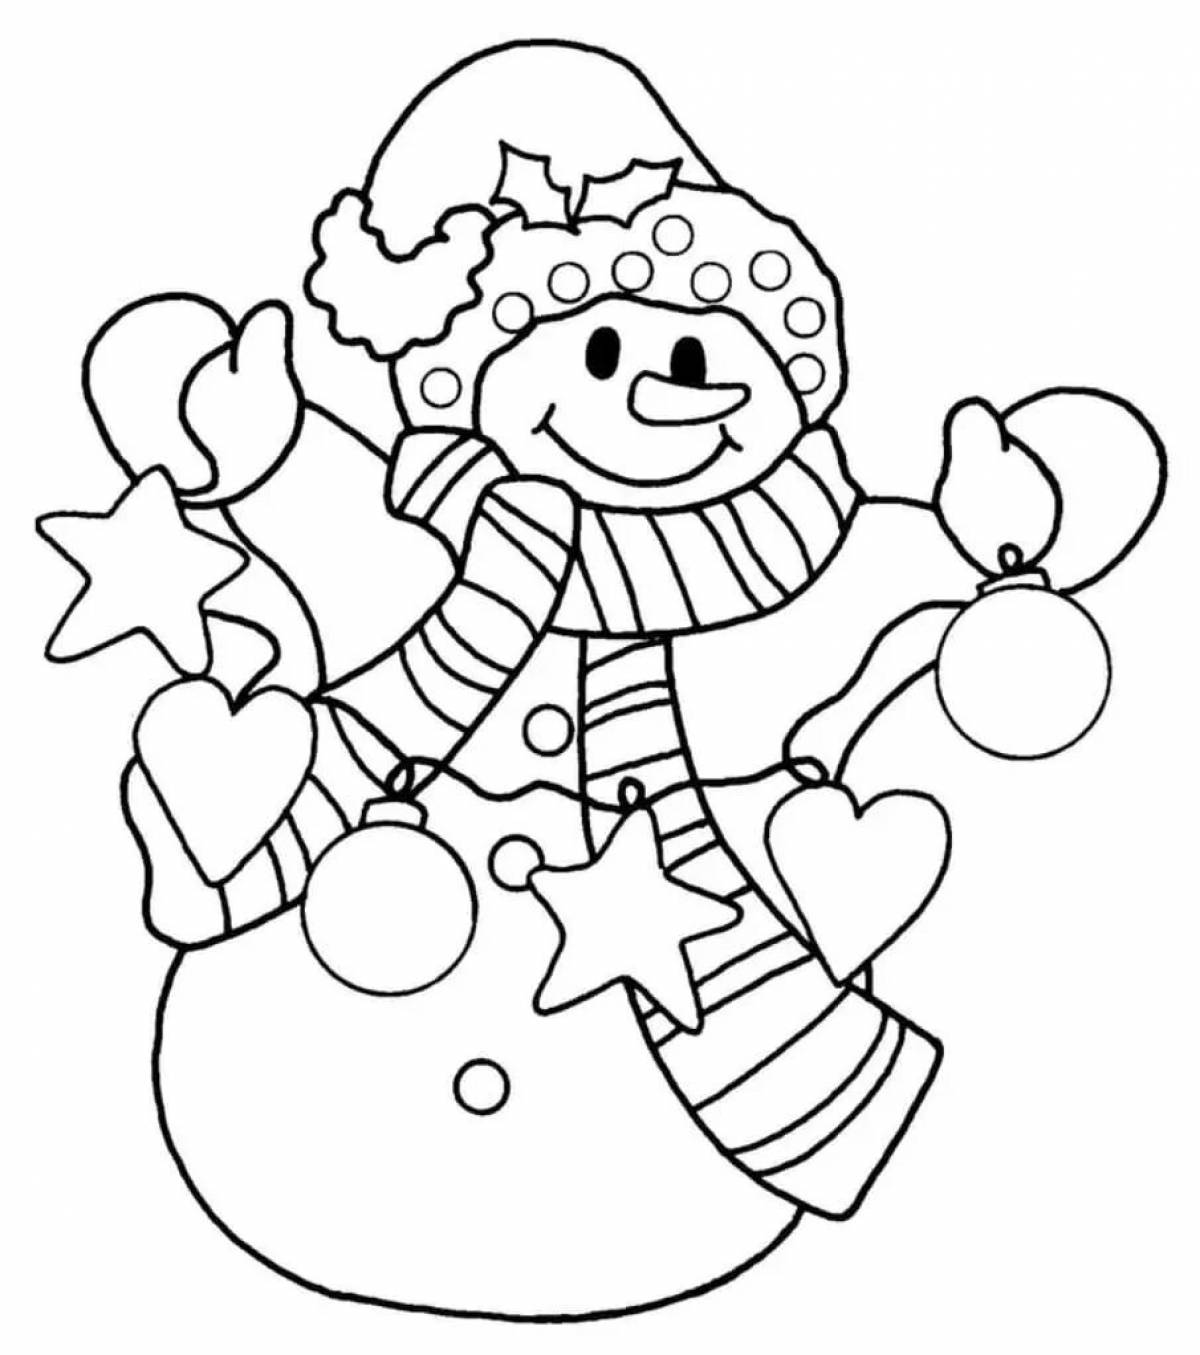 Coloring card 